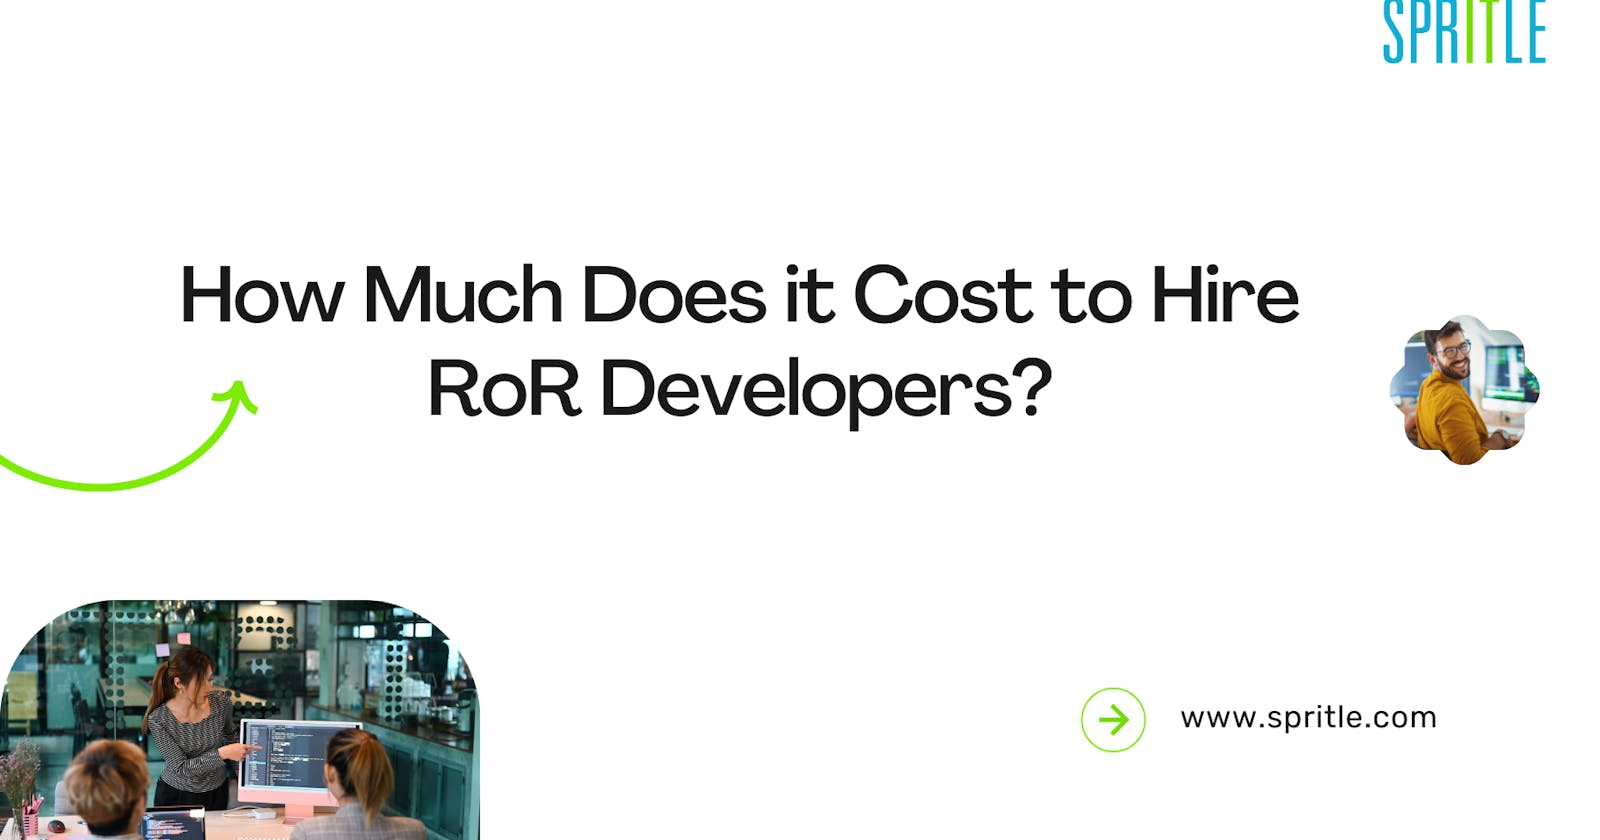 How Much Does it Cost to Hire Ruby on Rails Developers?